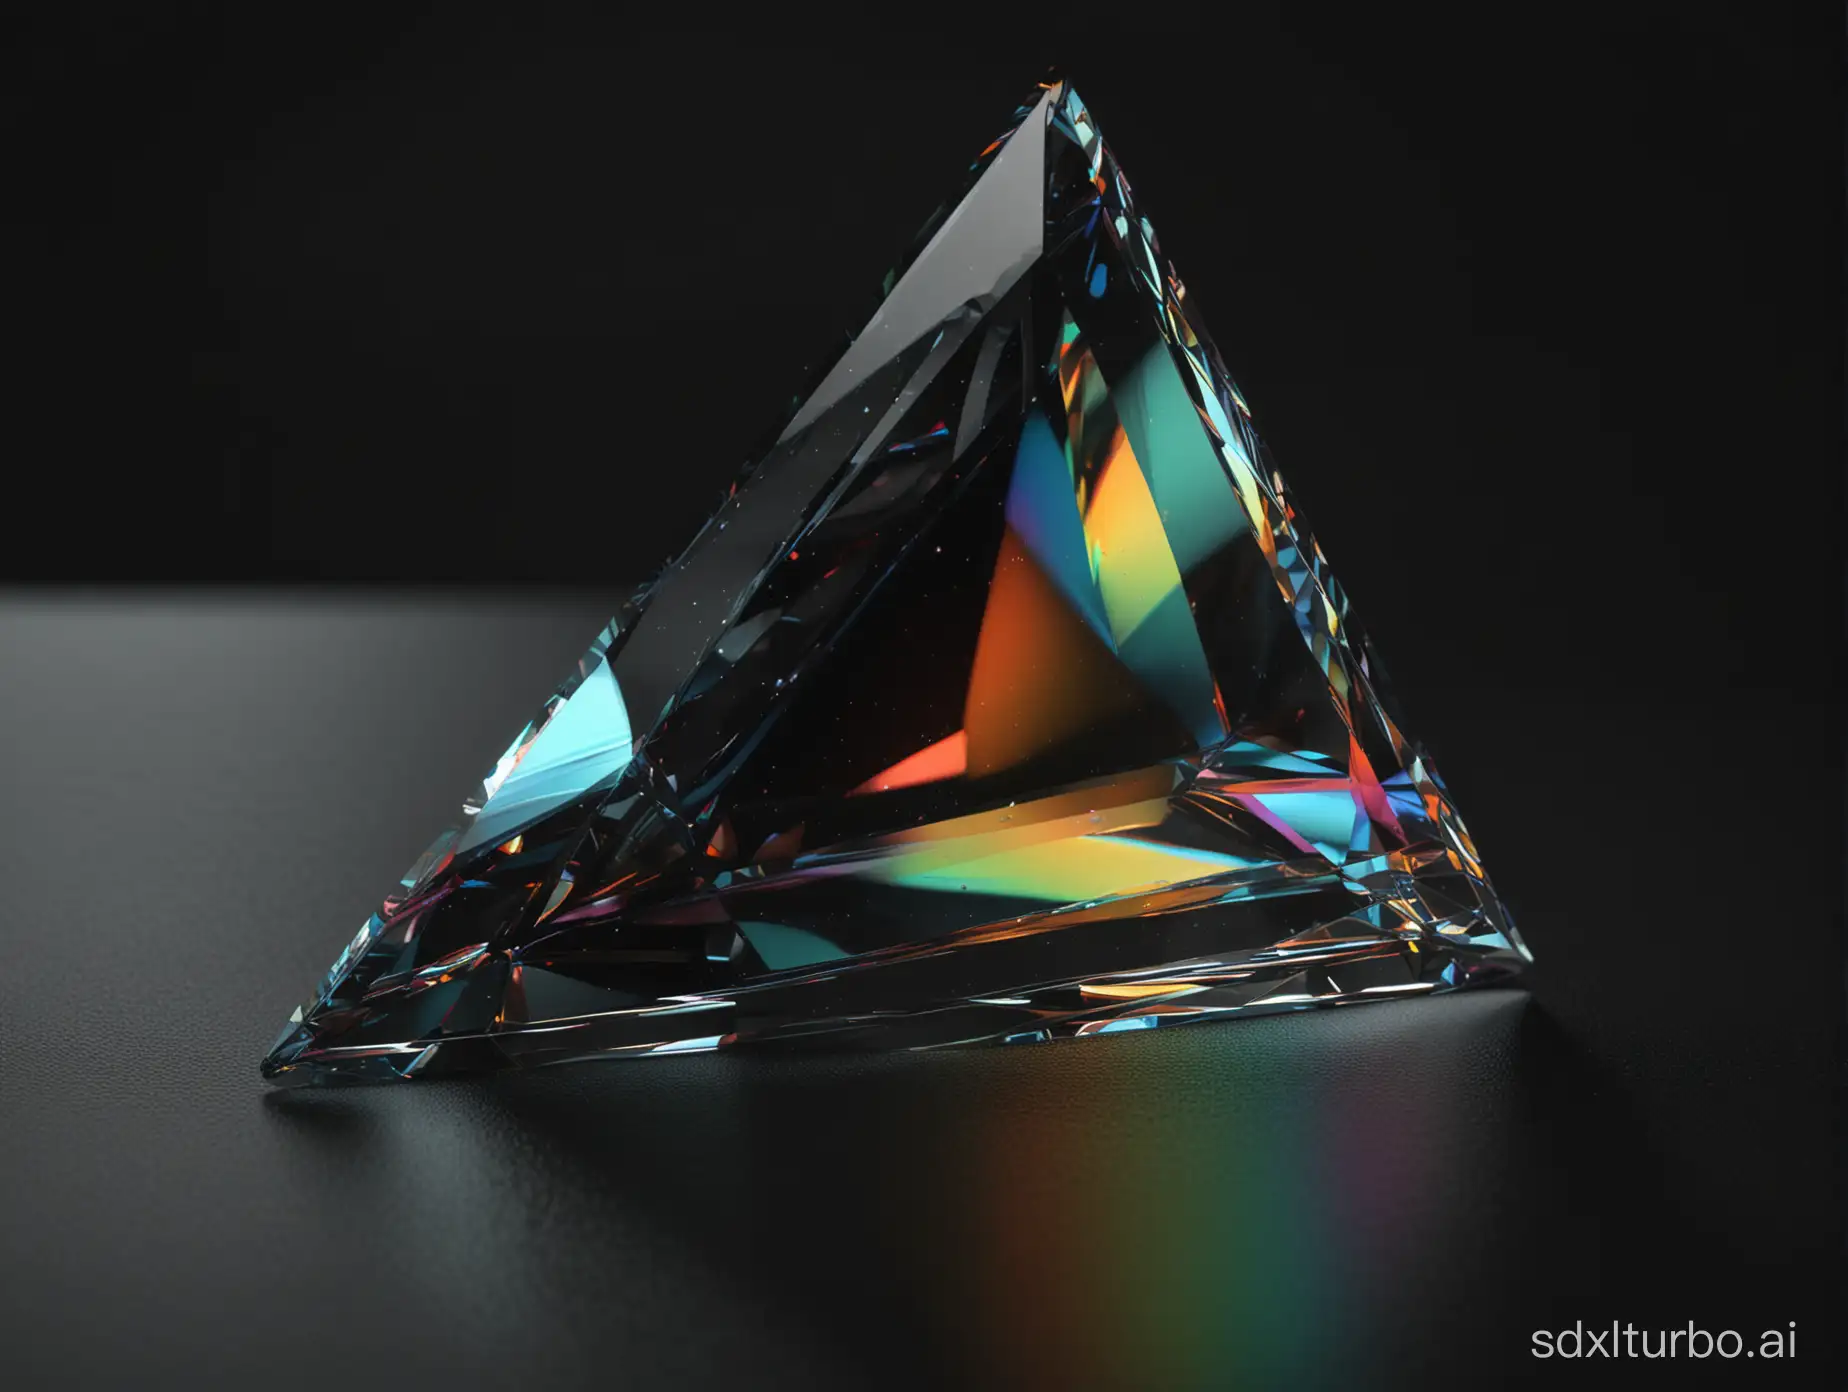 Glass-Prism-Triangular-Sculpture-with-Colored-Refraction-on-Black-Background